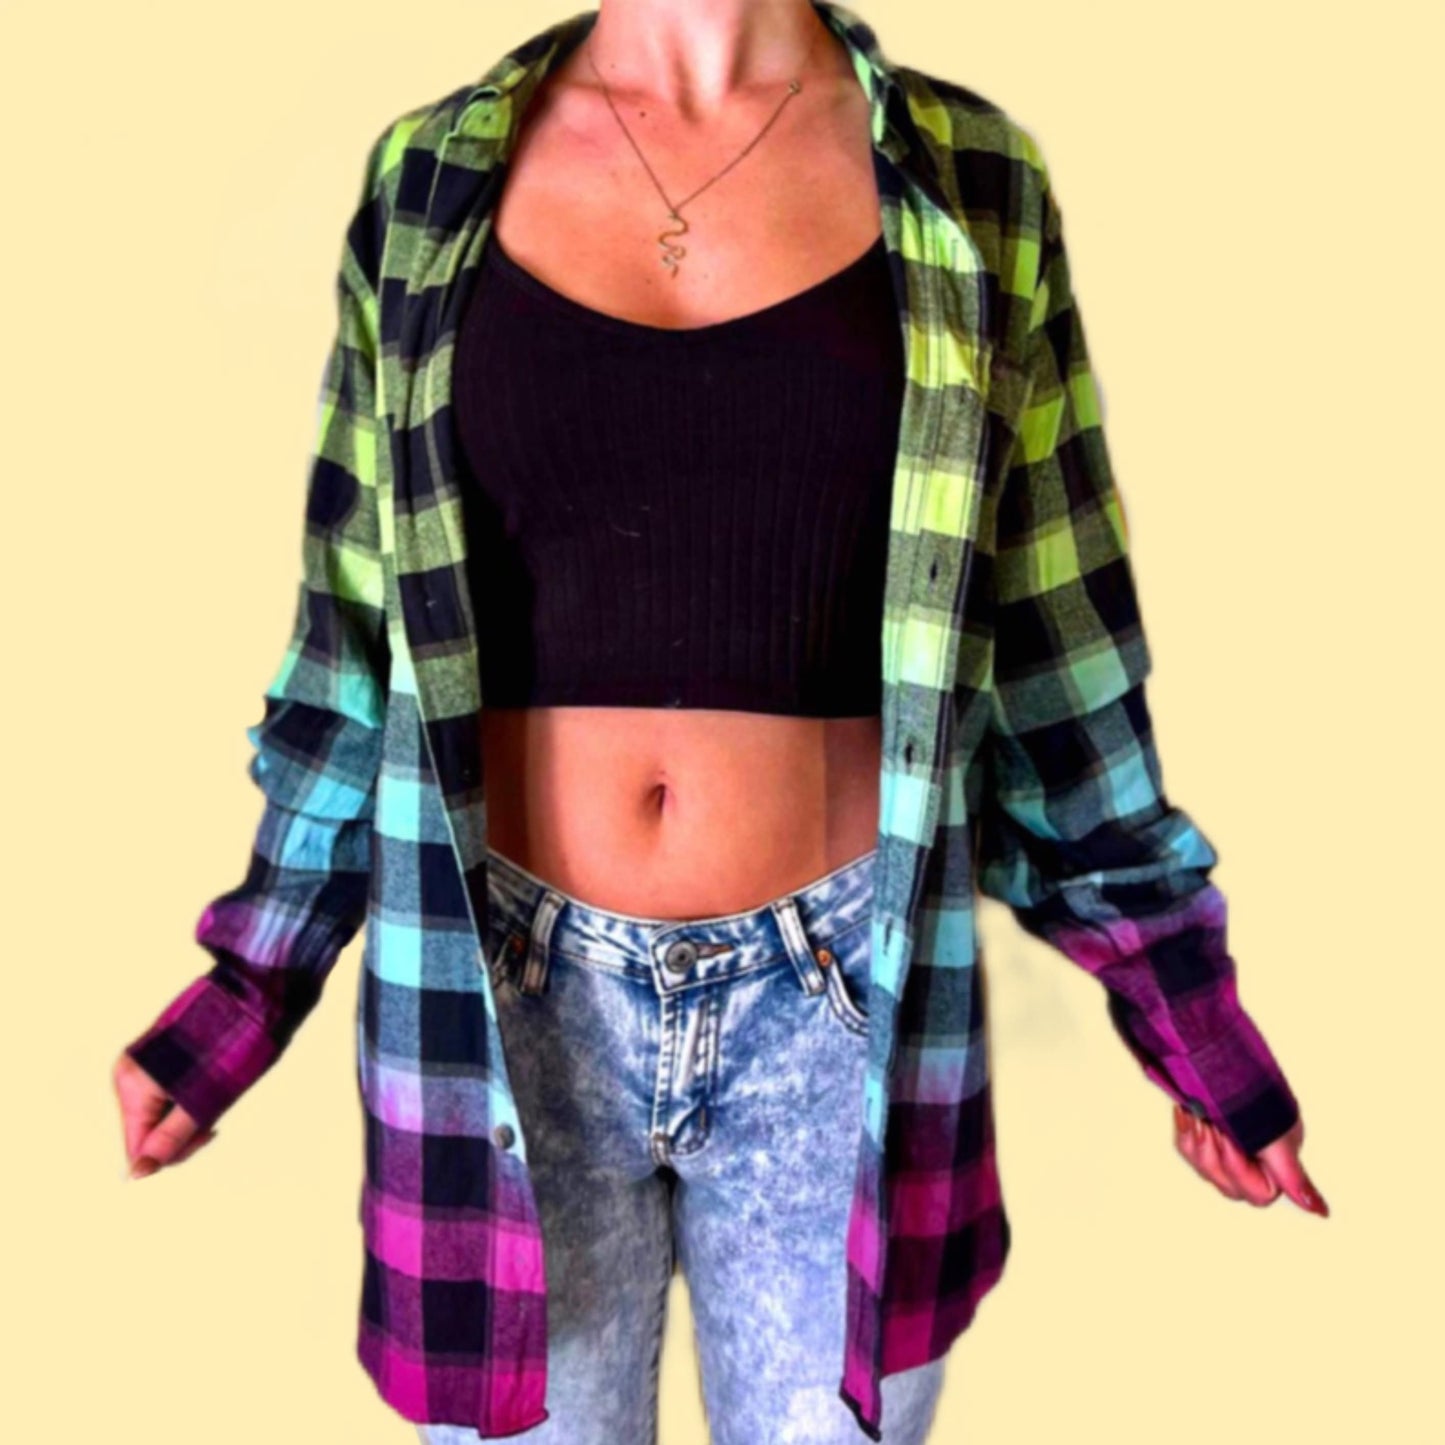 Oversized Neon Green, Blue, Purple Tie Dye Plaid Flannel Shirt. Unique Dip Dye Gradient Flannel is Handmade with quality fiber reactive dyes for vibrant color that lasts.100% Cotton Soft Flannel Fabric, Collar Neckline,  Button Closure, Long Sleeves, front pocket, Machine washable, for men and women